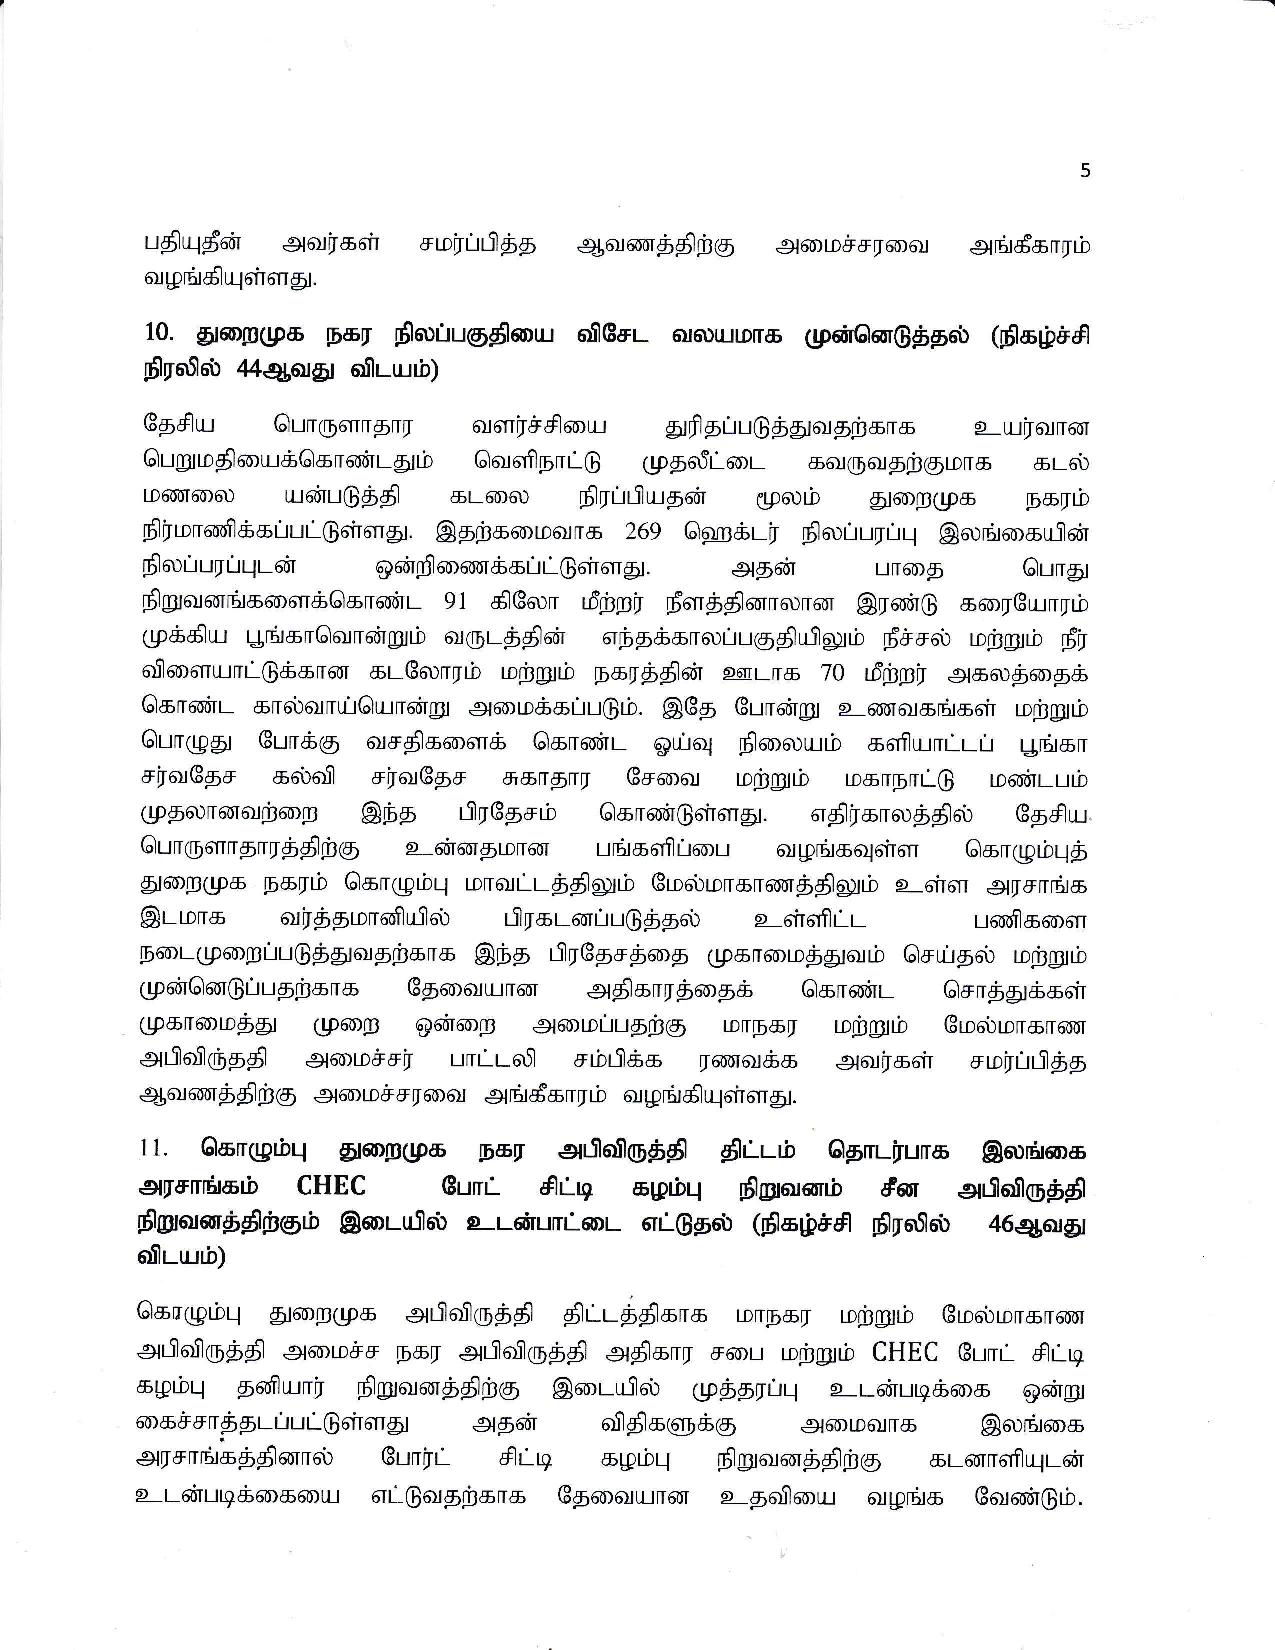 Cabinet Decision on 30.04.2019 T page 005